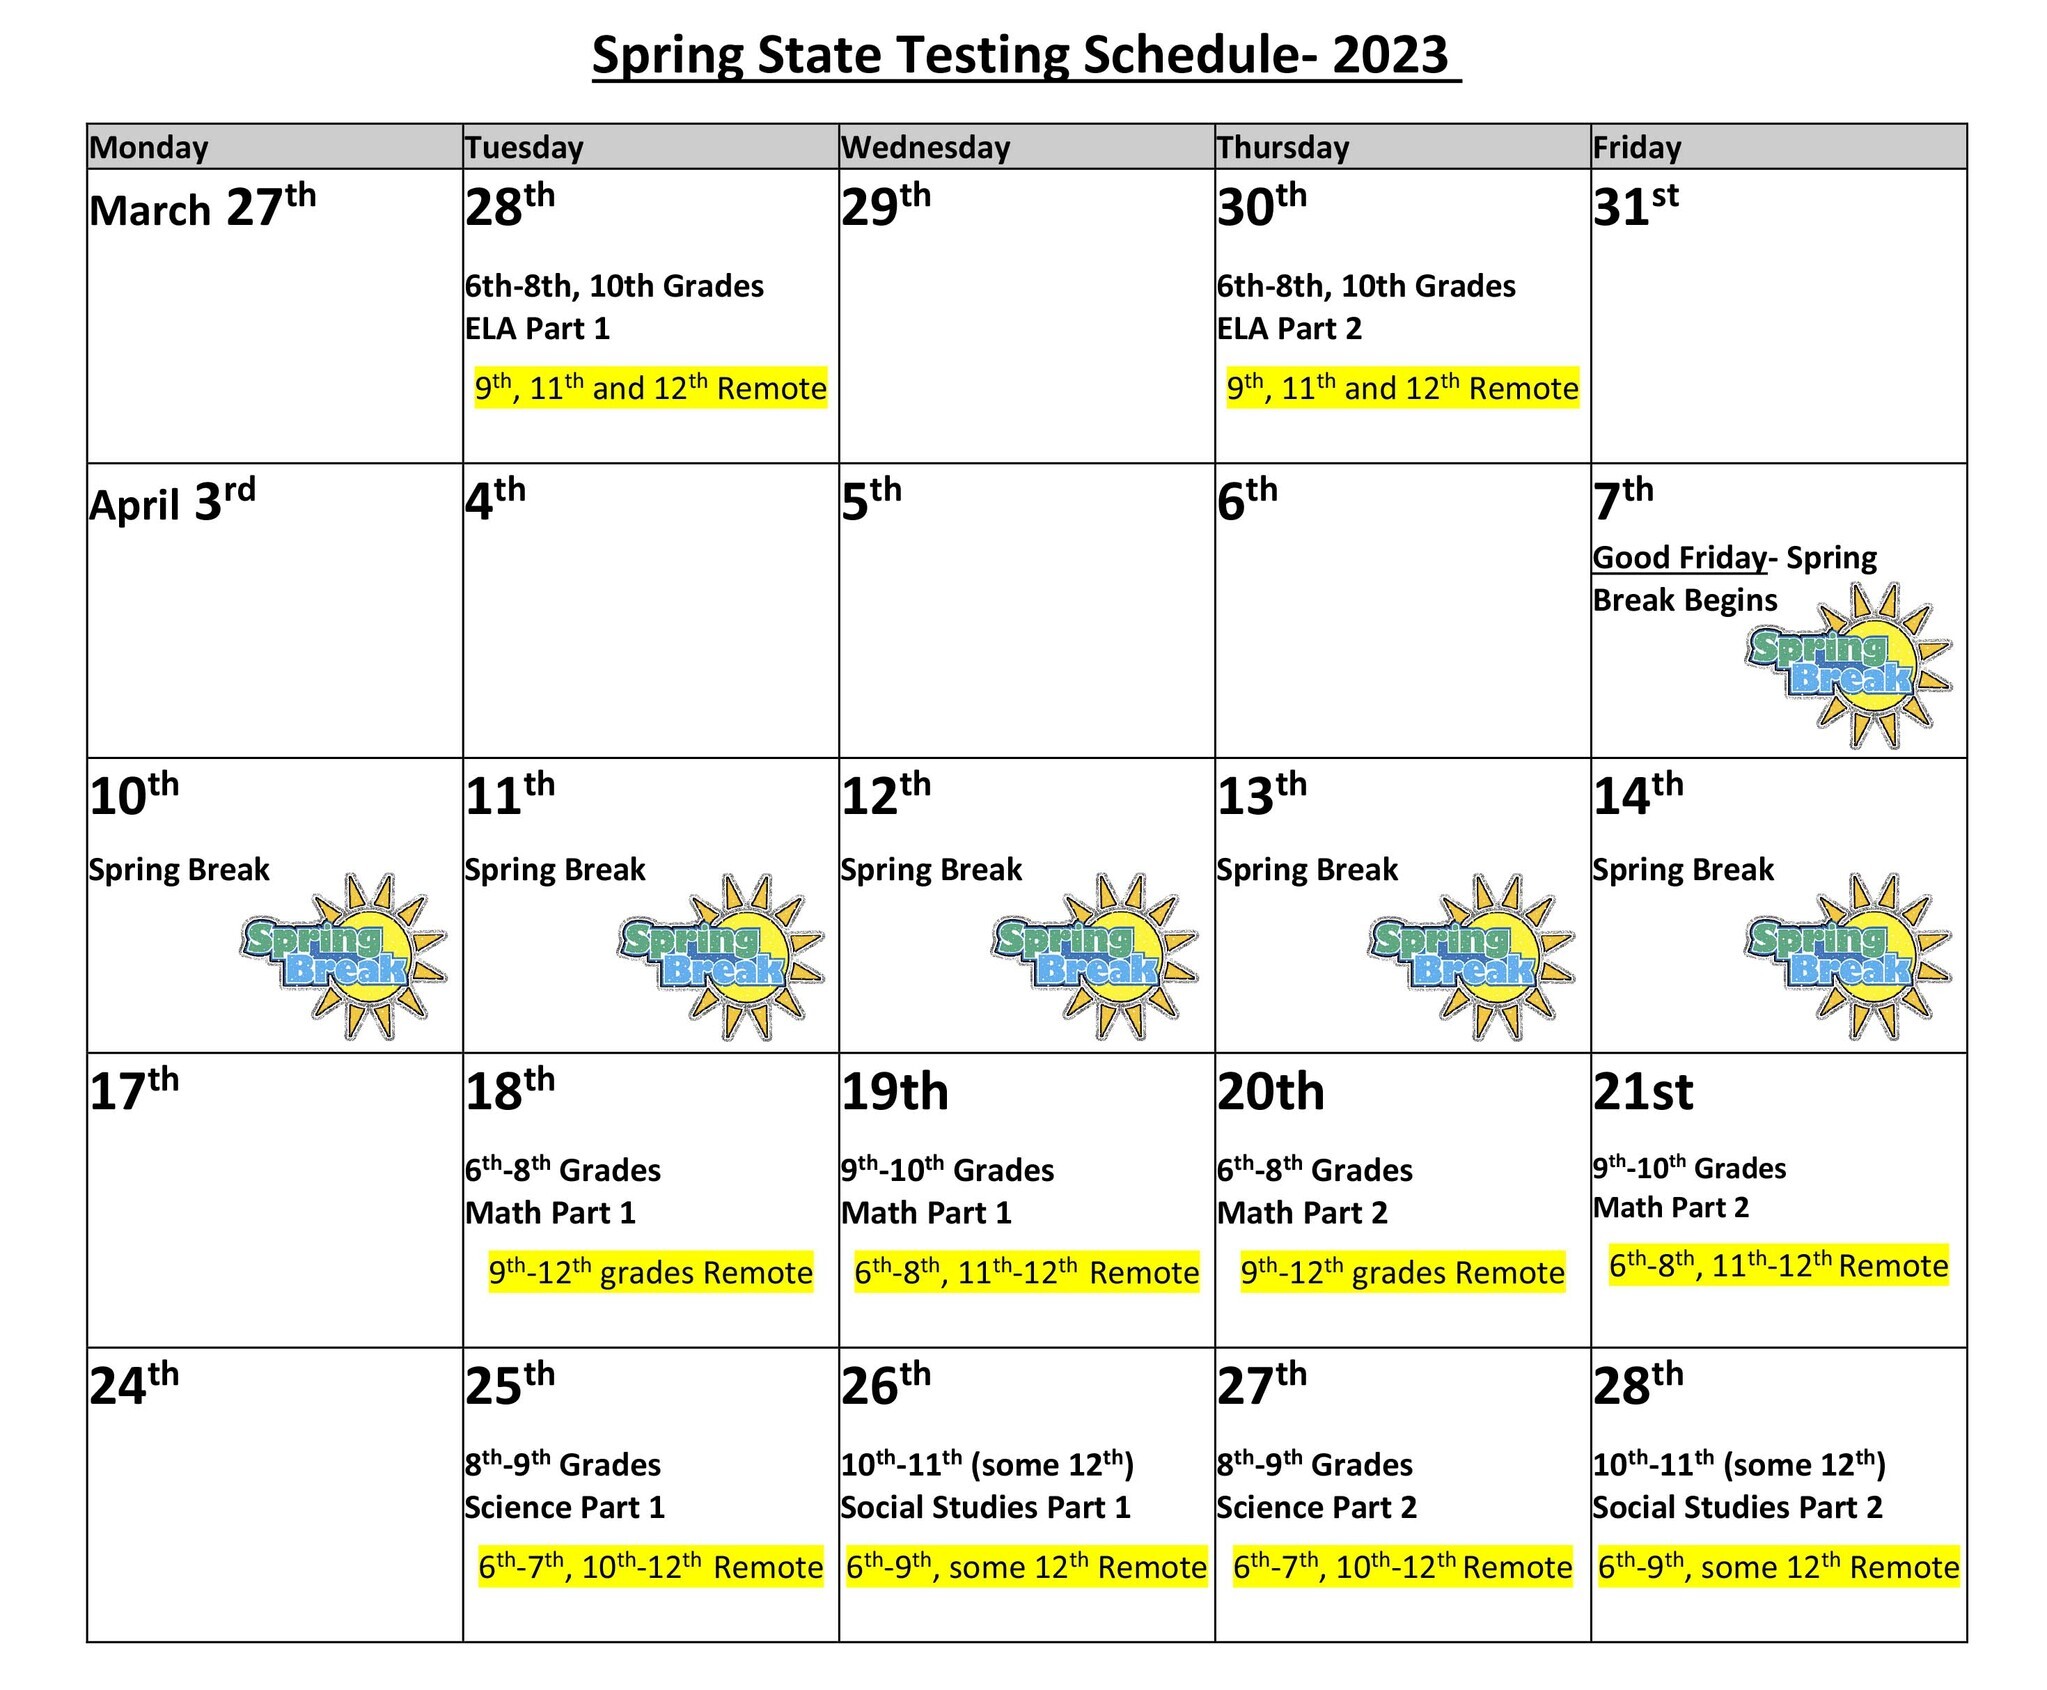 2023 Spring State Testing Schedule